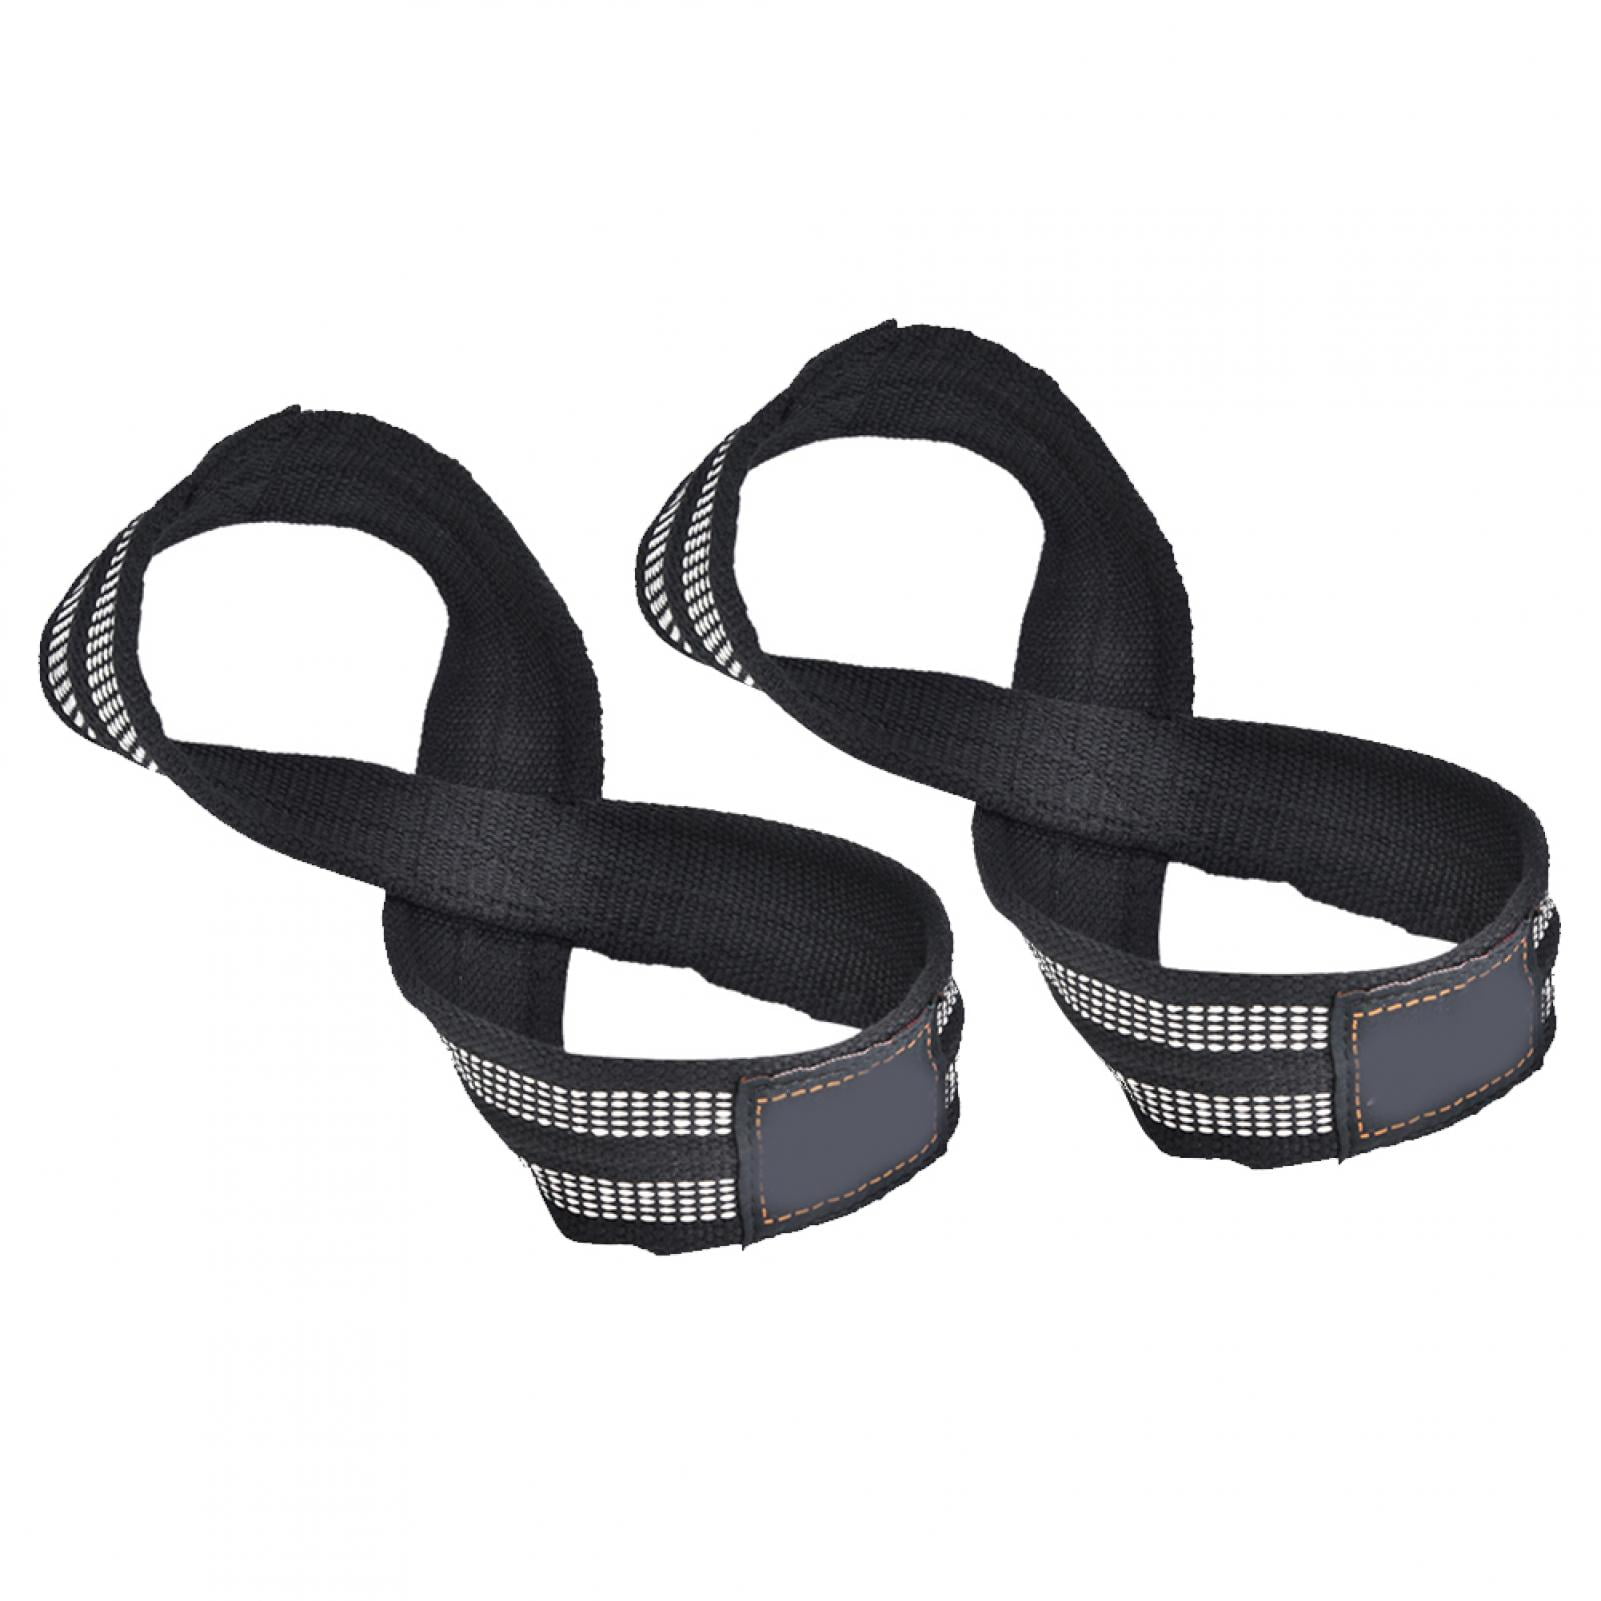 Gym Fitness Lifting Straps Weightlifting Wrist Weight Belt Barbell Wristband Hot 